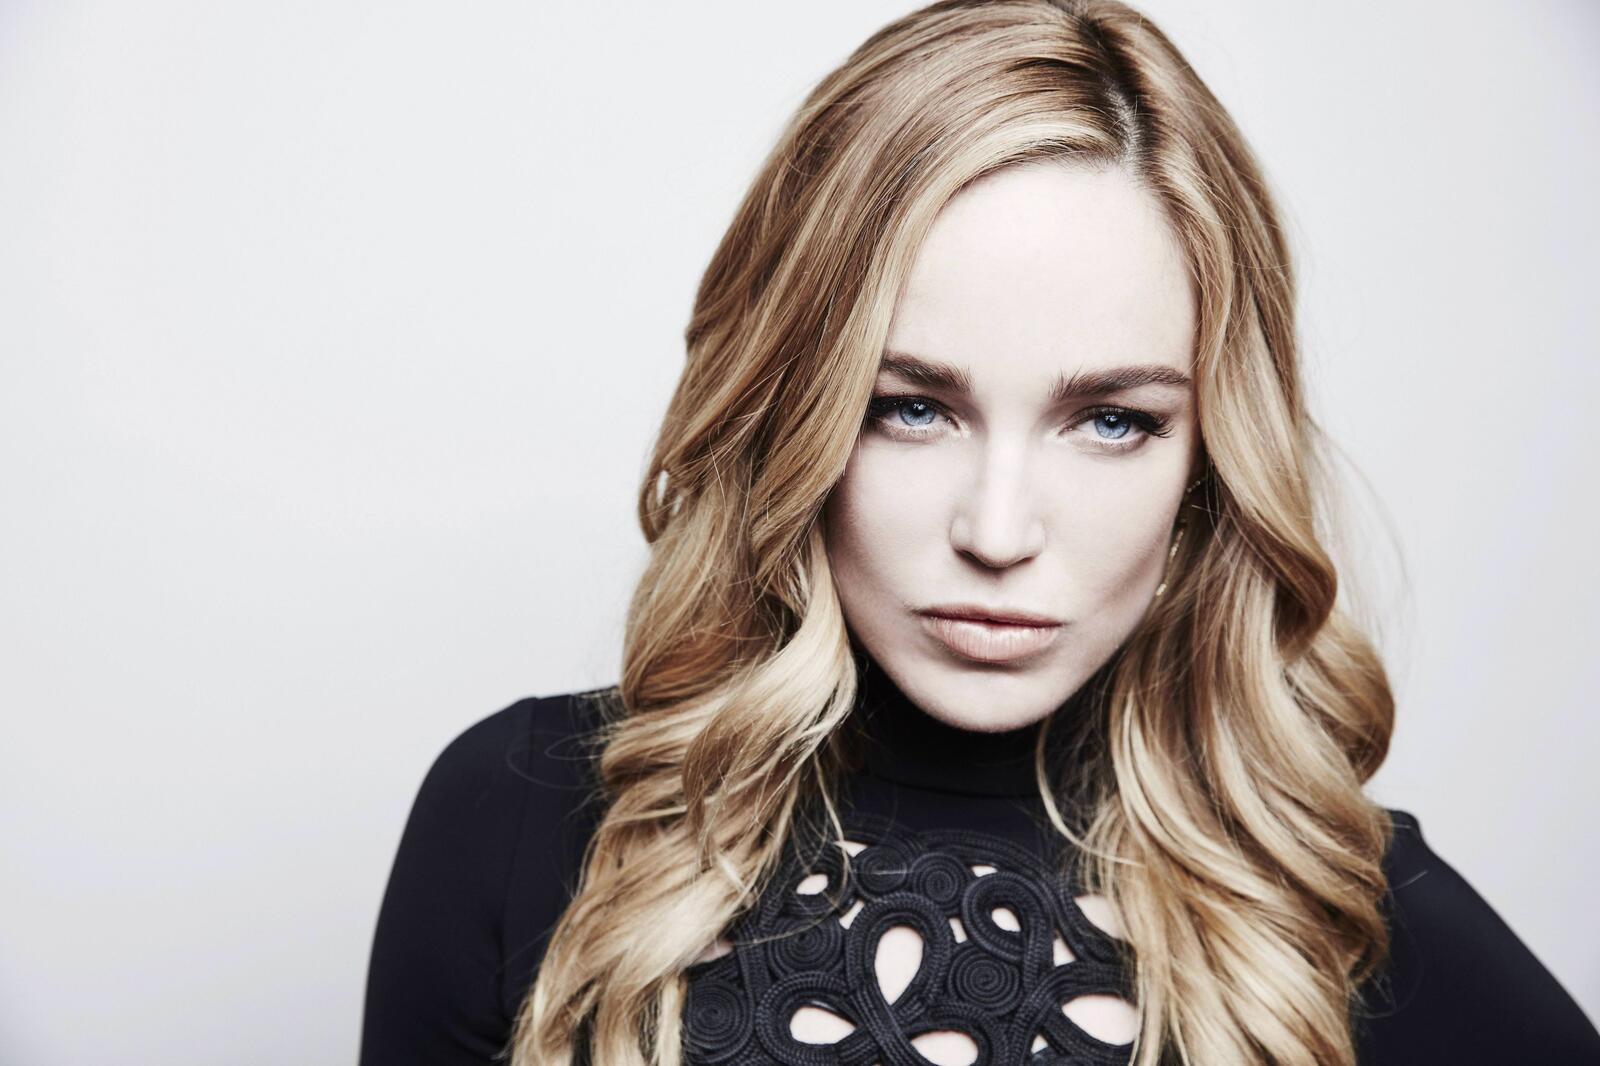 Wallpapers Caity Lotz curly hair celebrity on the desktop